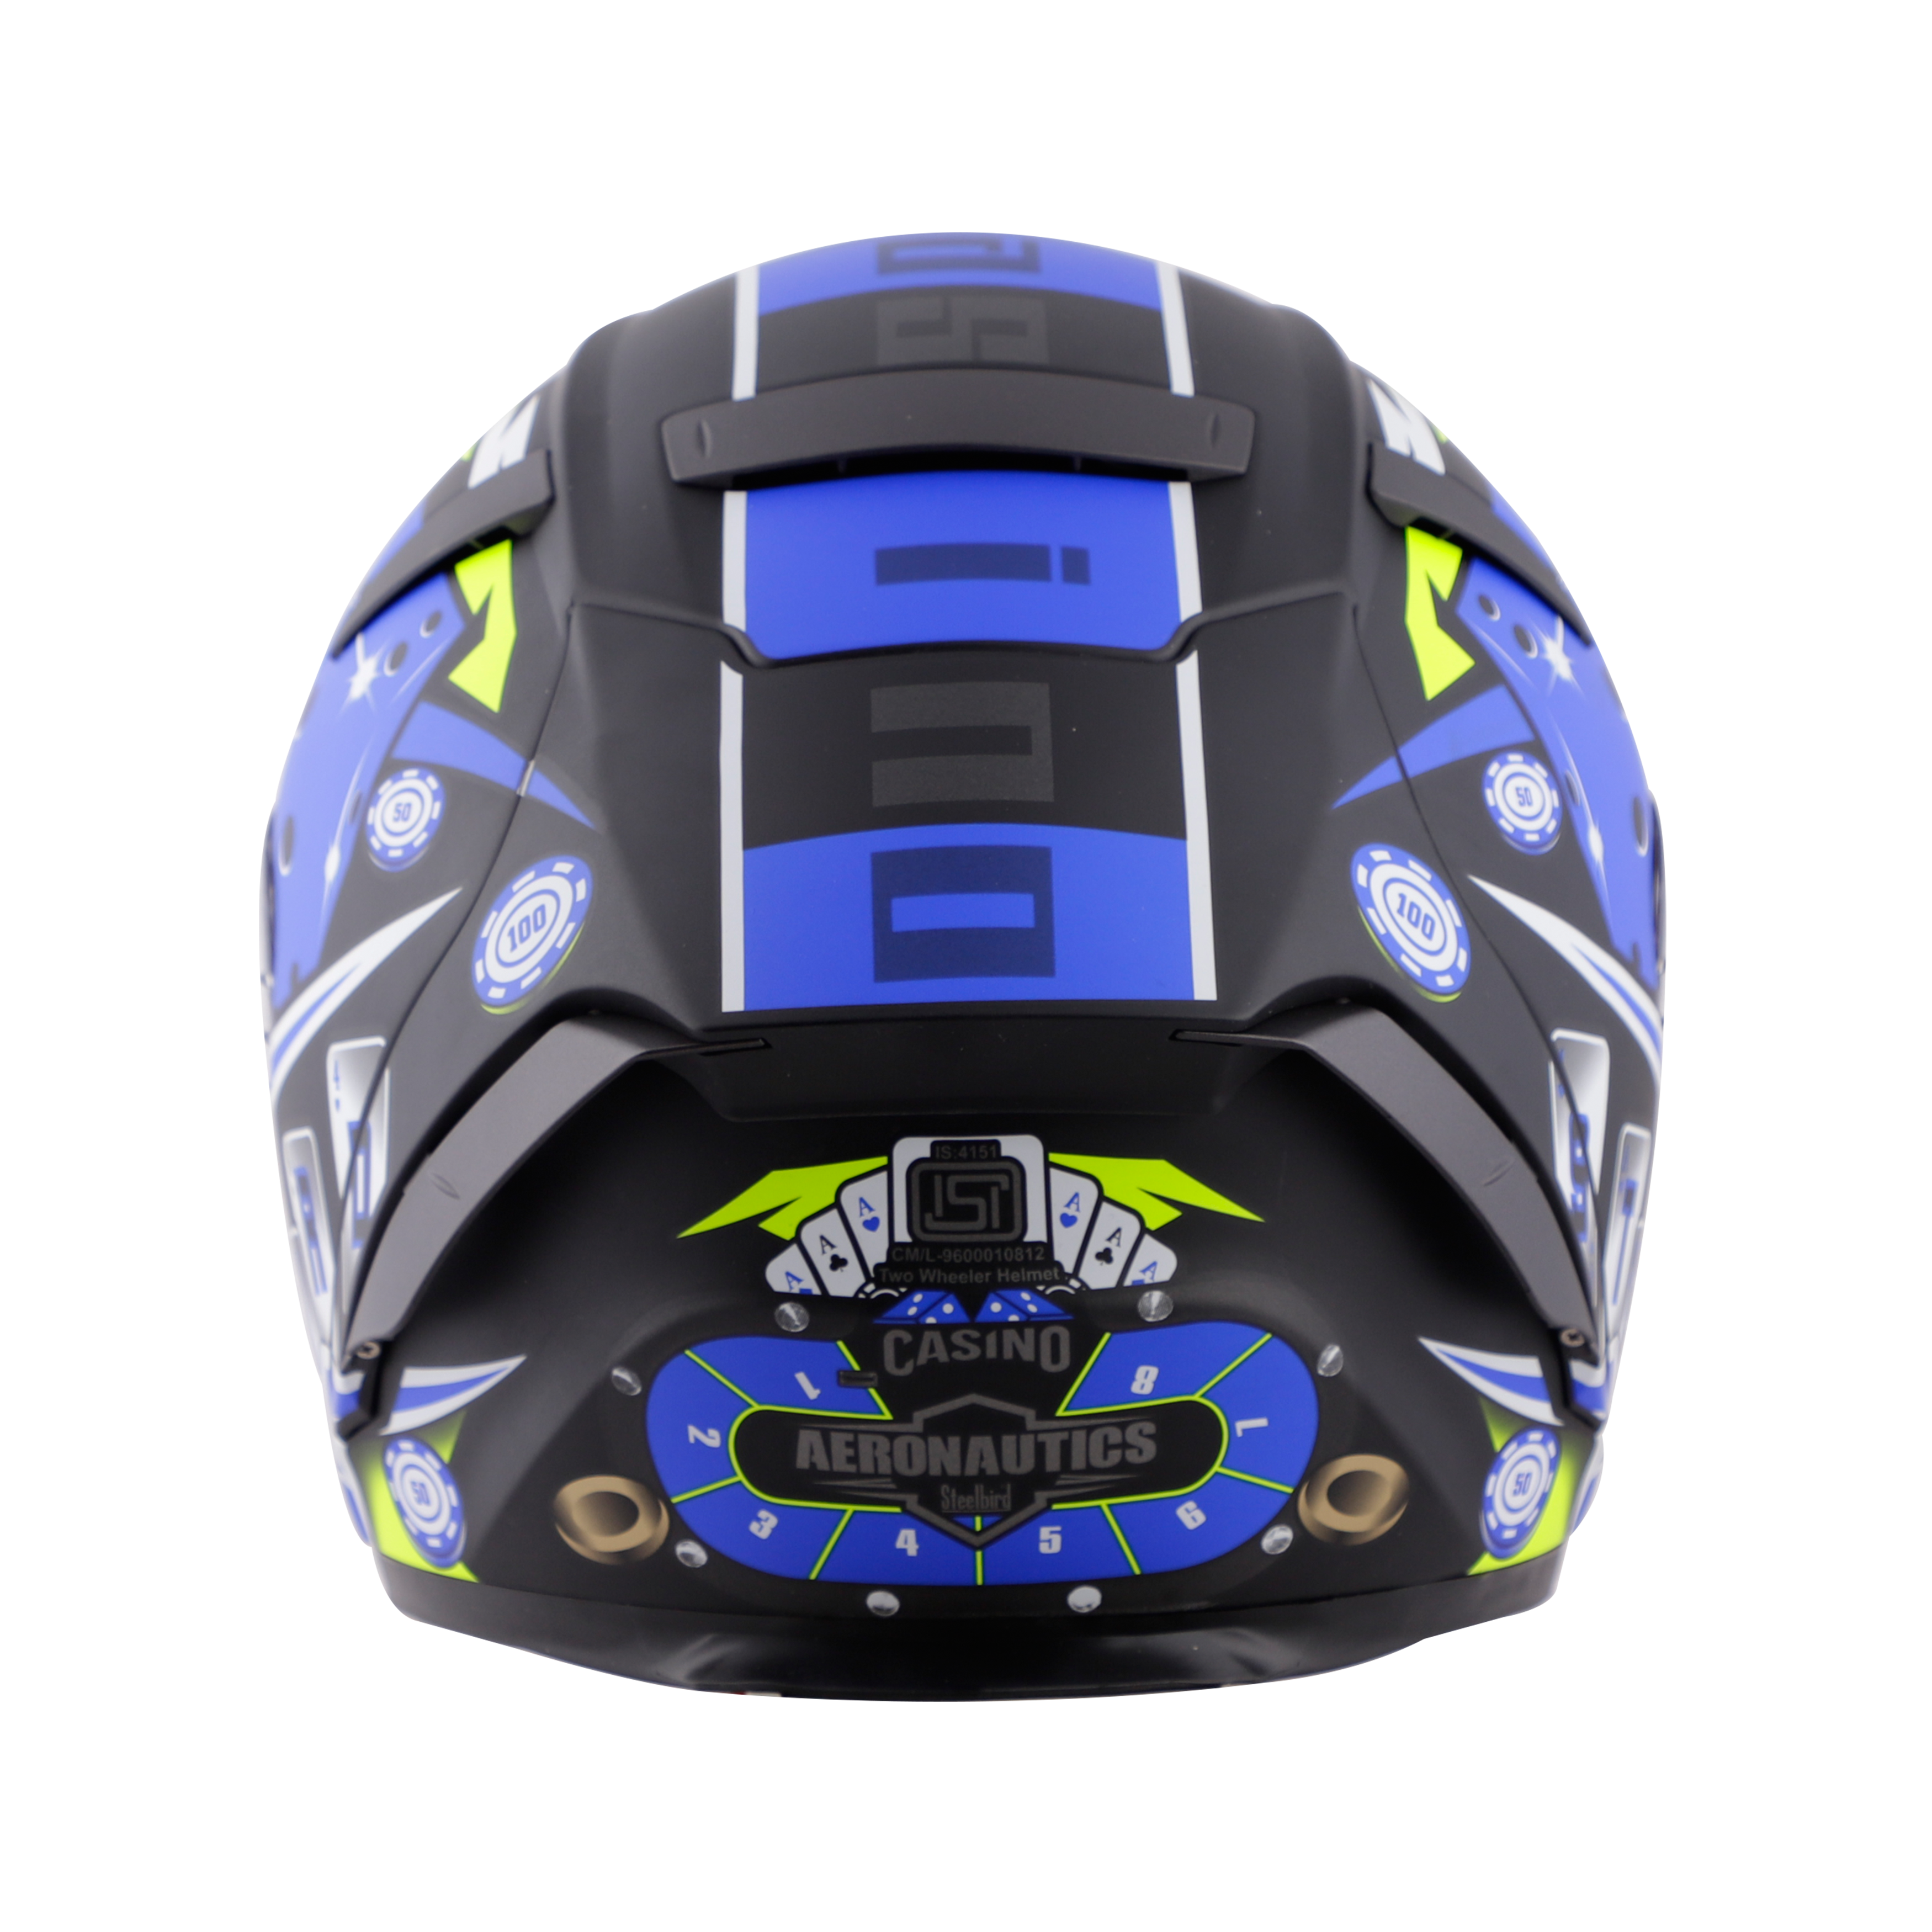 SA-2 CASINO MAT BLACK WITH BLUE ( FITTED WITH CLEAR VISOR EXTRA RAINBOW CHROME VISOR FREE WITH ANTI-FOG SHIELD HOLDER)